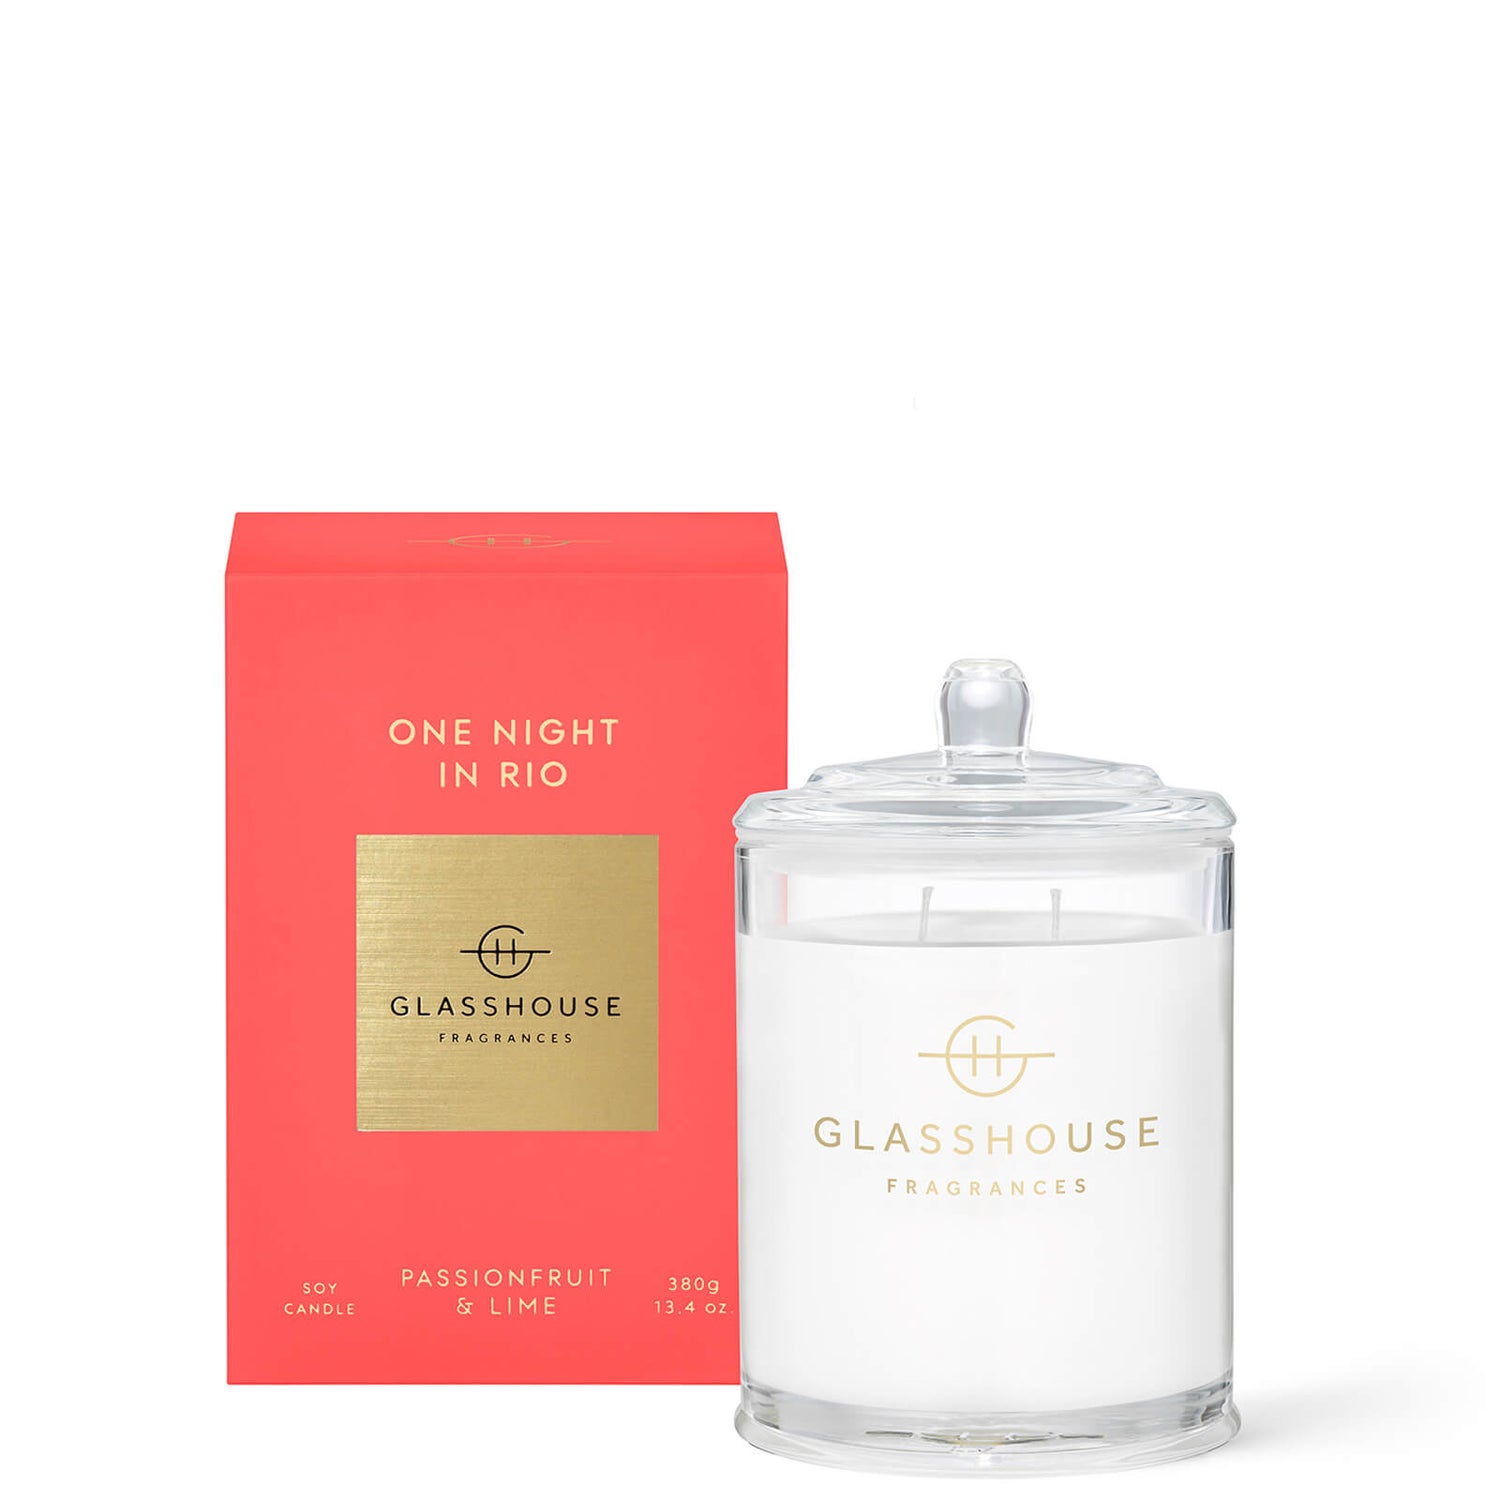 Glasshouse Fragrances One Night in Rio Candle 380g